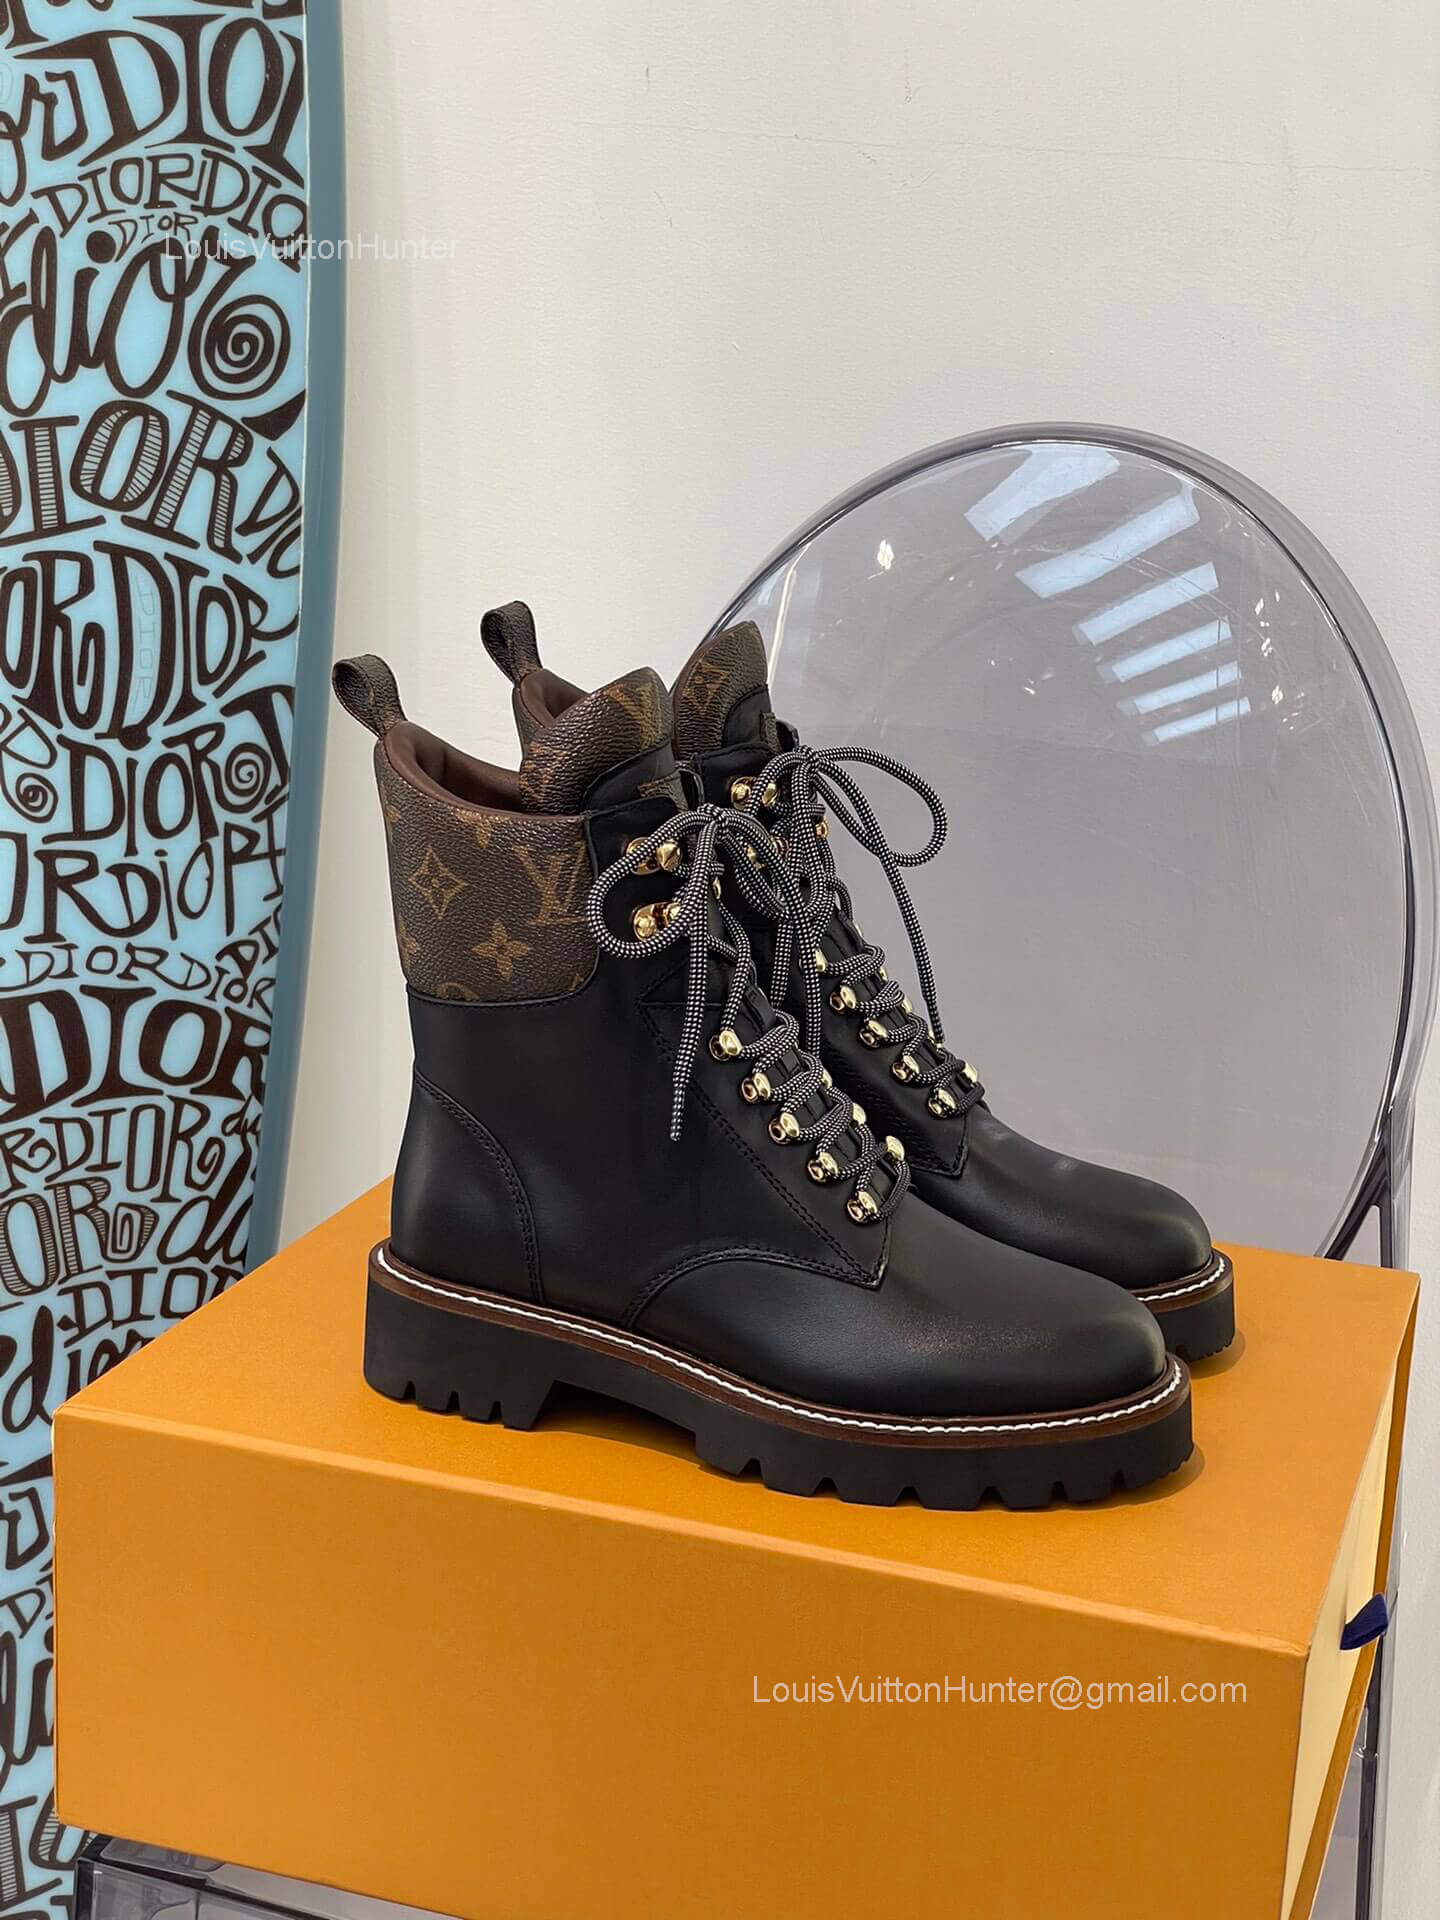 Louis Vuitton Territory Flat Ranger Ankle Boots in Black Calf Leather and Monogram Canvas 2281636